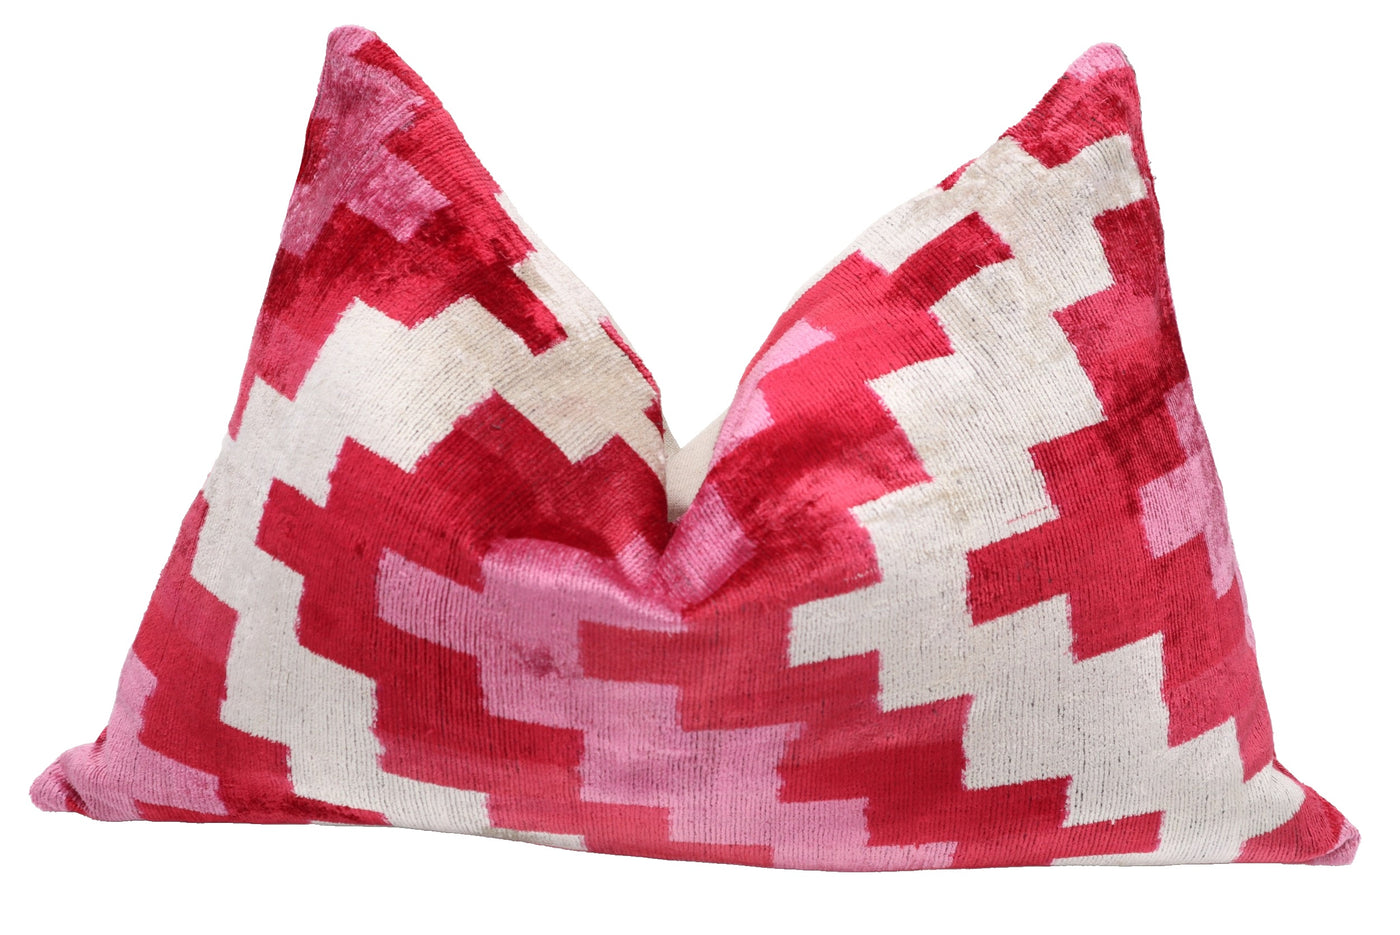 Canvello Handmade Pink Red Throw Pillows For Couch - 16x24 in